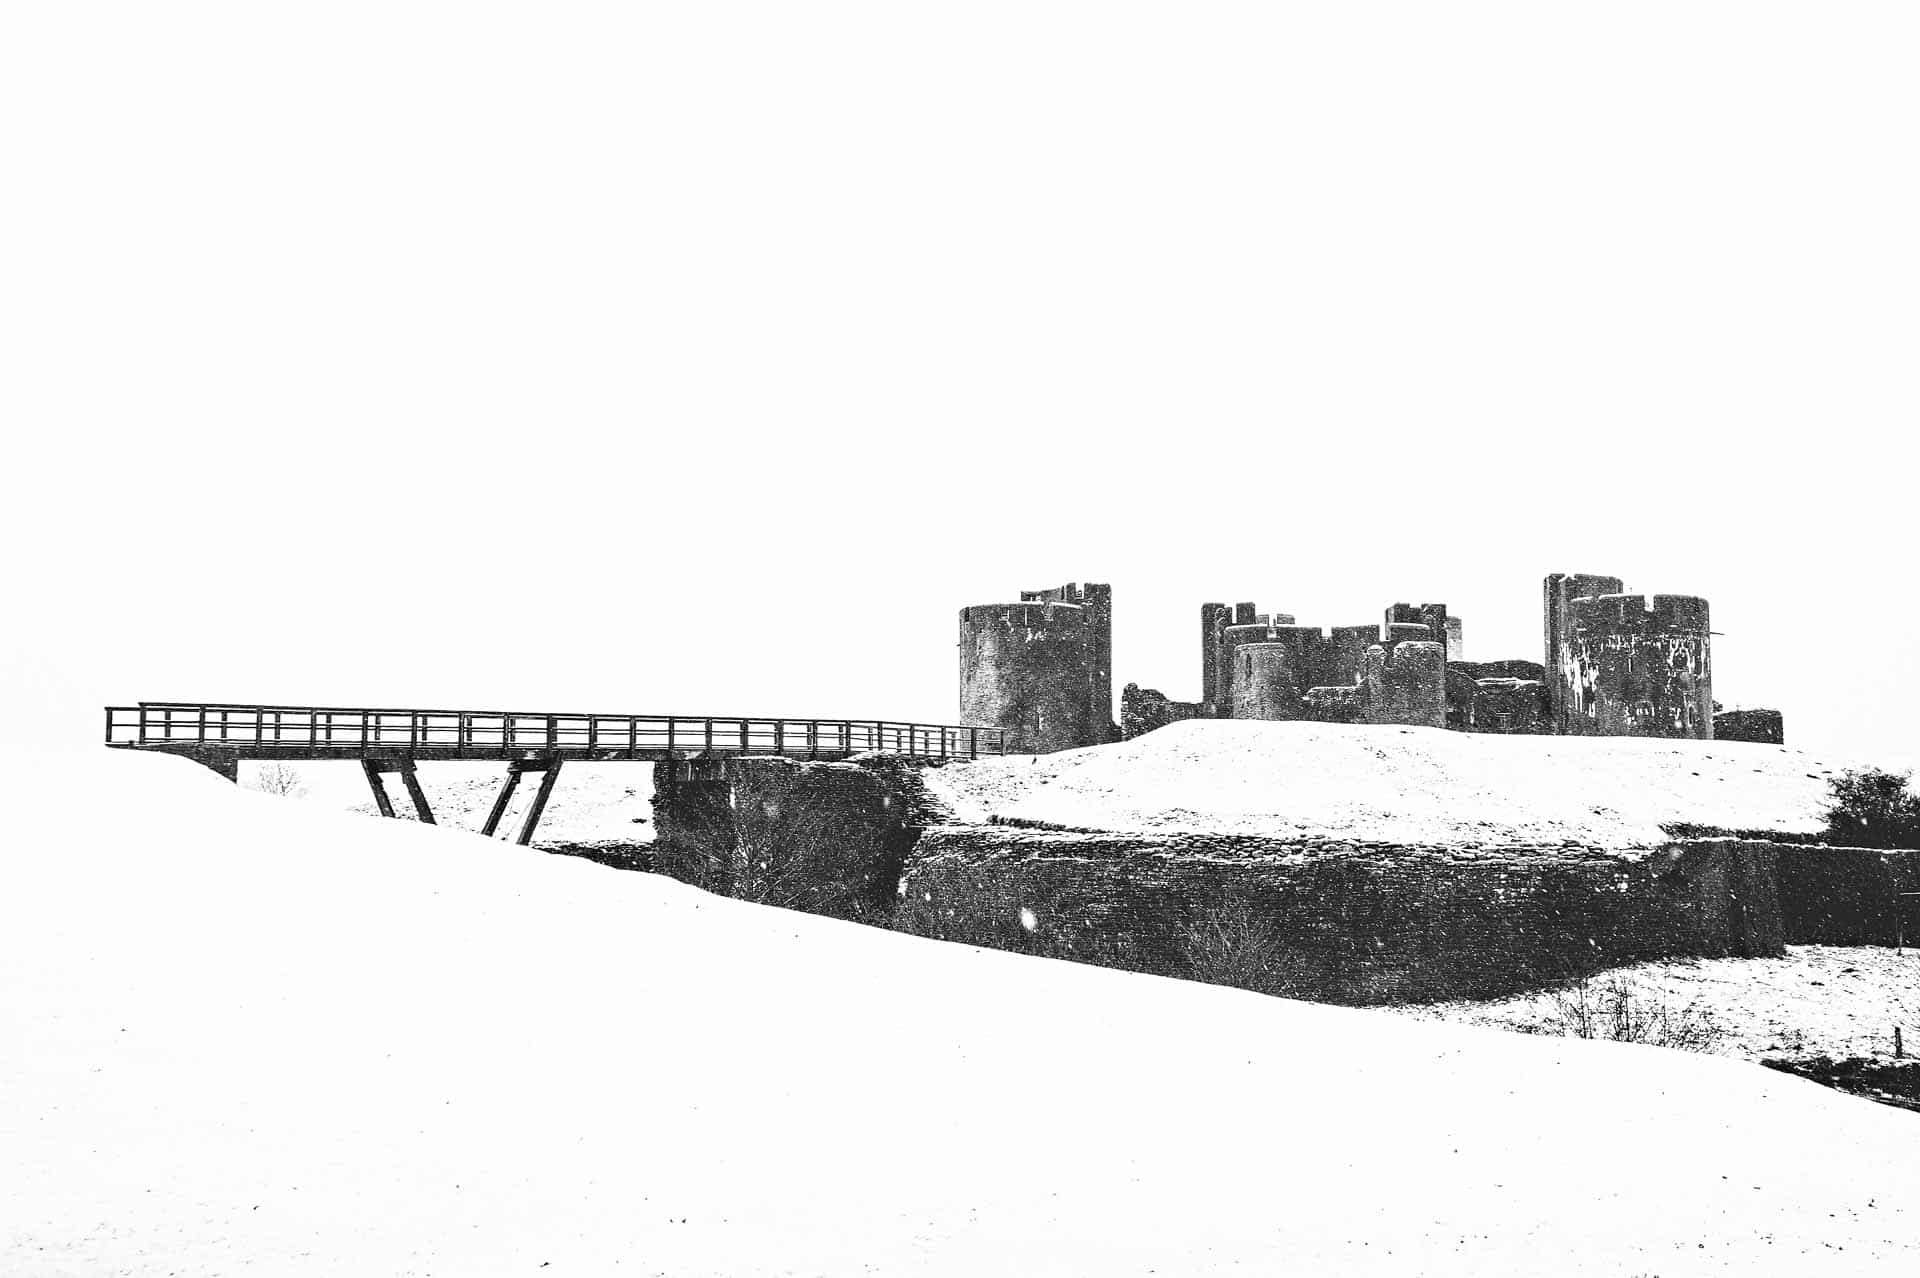 Distant Profile of Caerphilly Castle and Bridge in the Snow